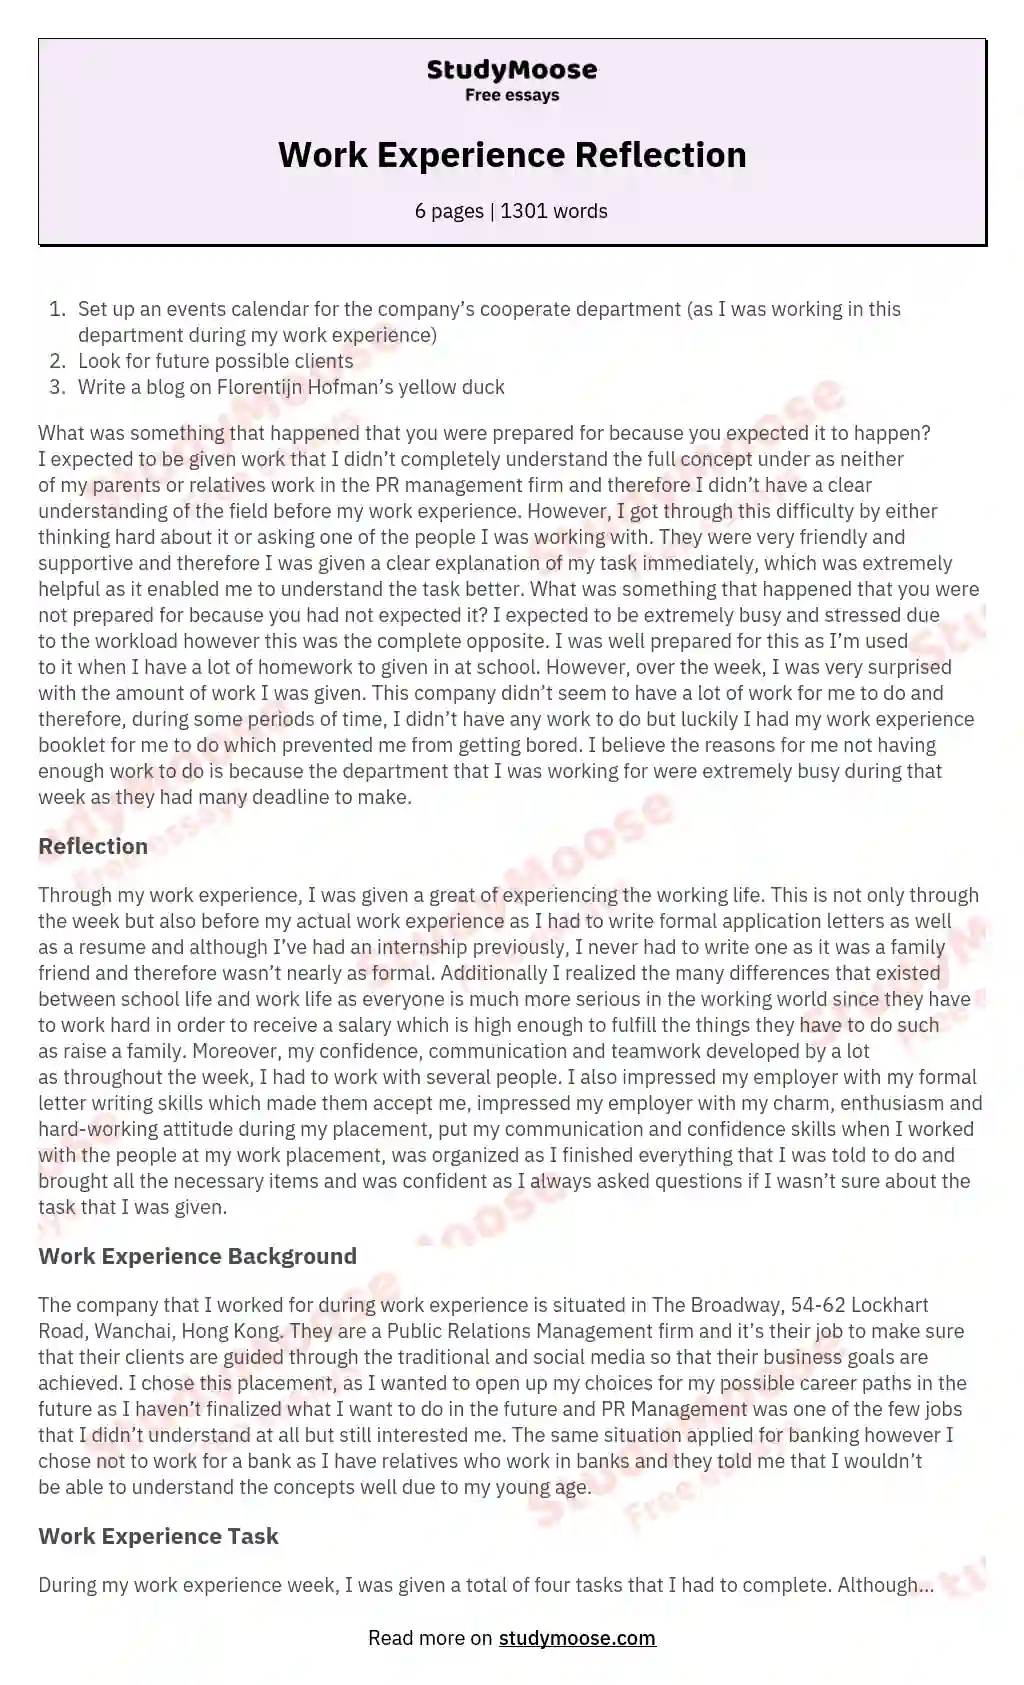 Work Experience Reflection essay